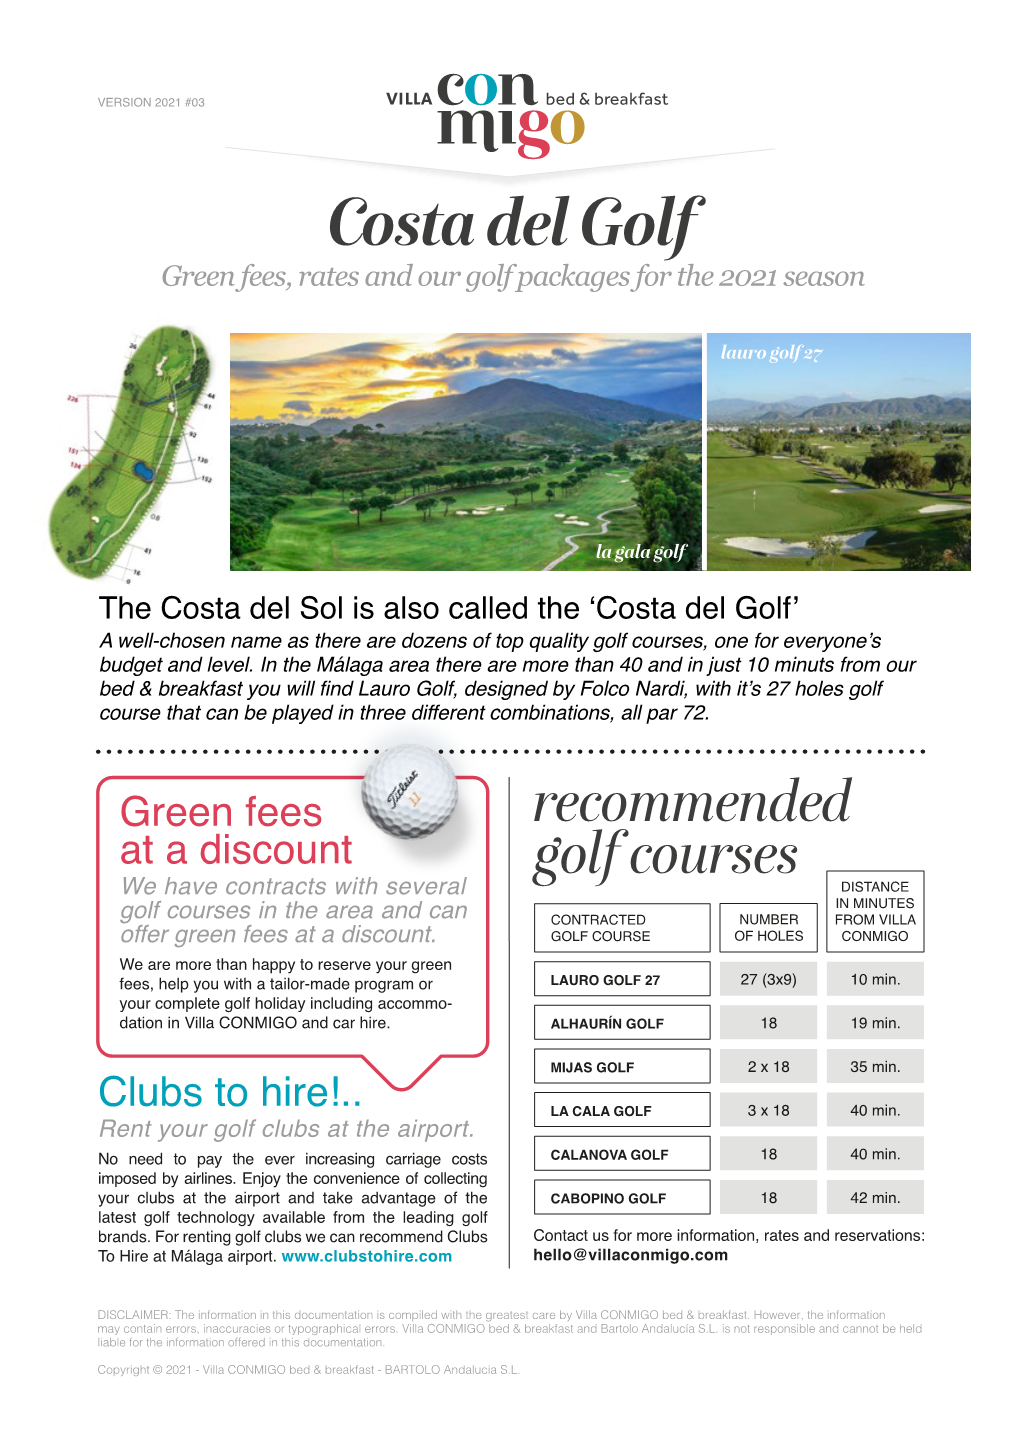 Costa Del Golf Green Fees, Rates and Our Golf Packages for the 2021 Season